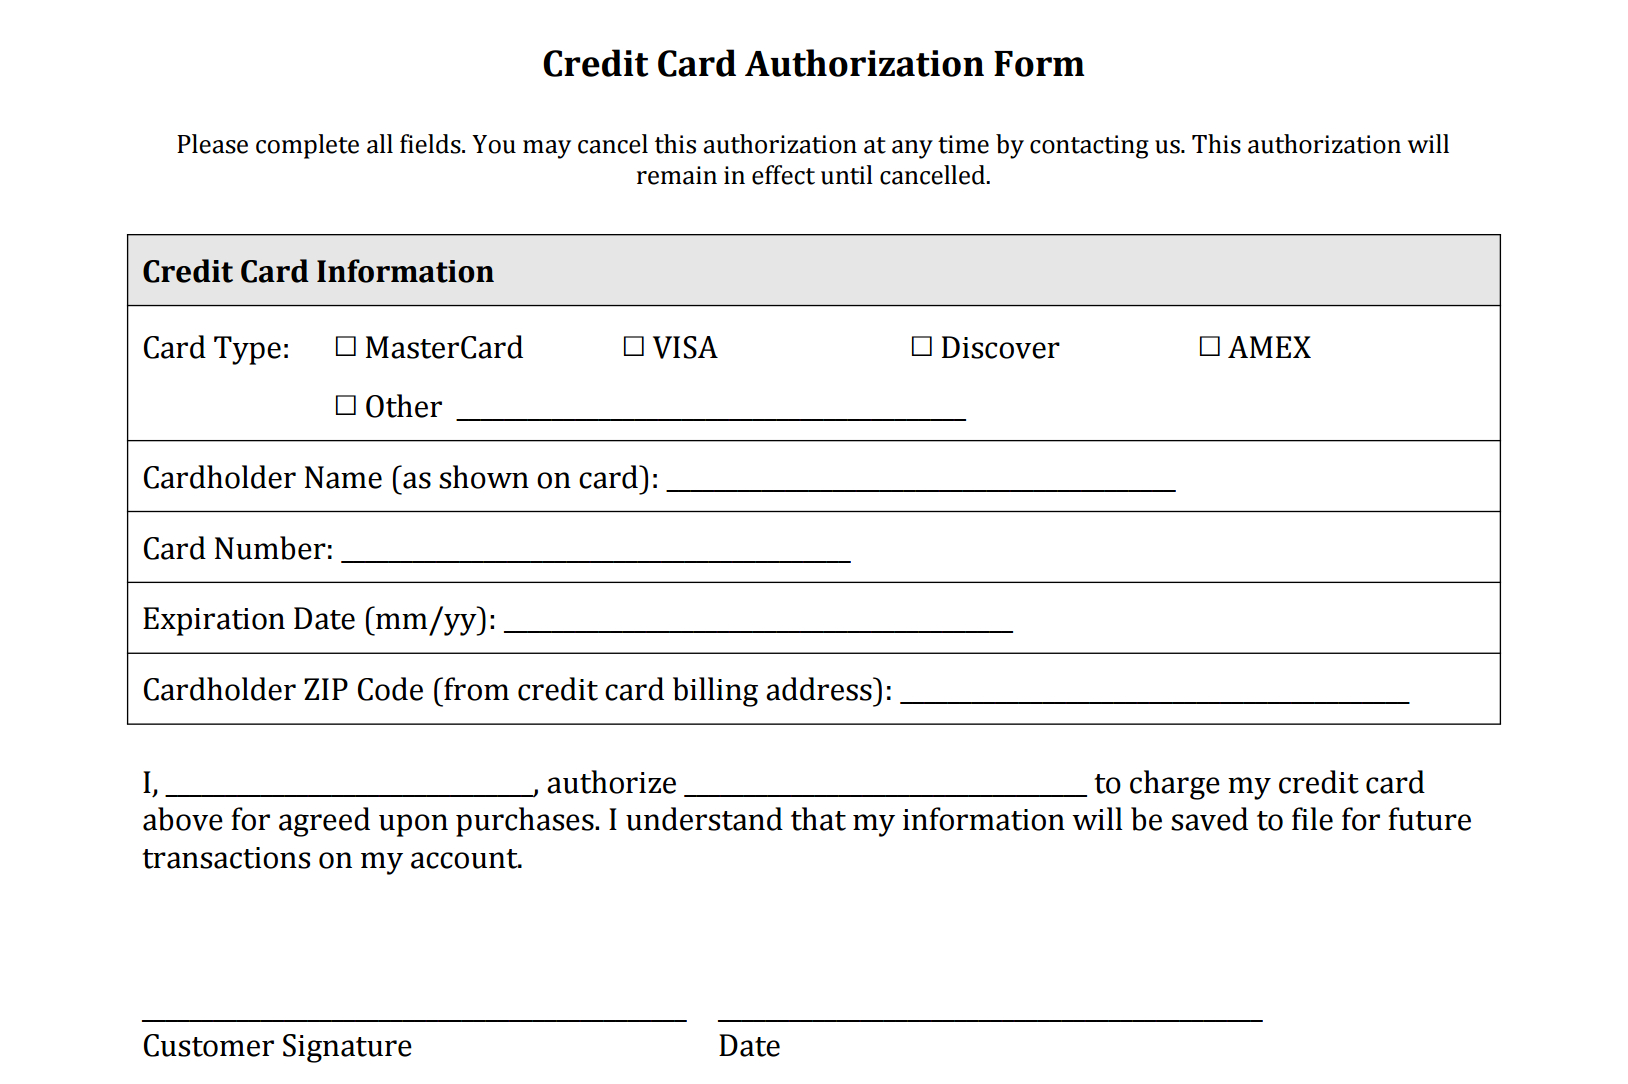 Credit Card Authorization Form Templates Download intended for Hotel Credit Card Authorization Form Template